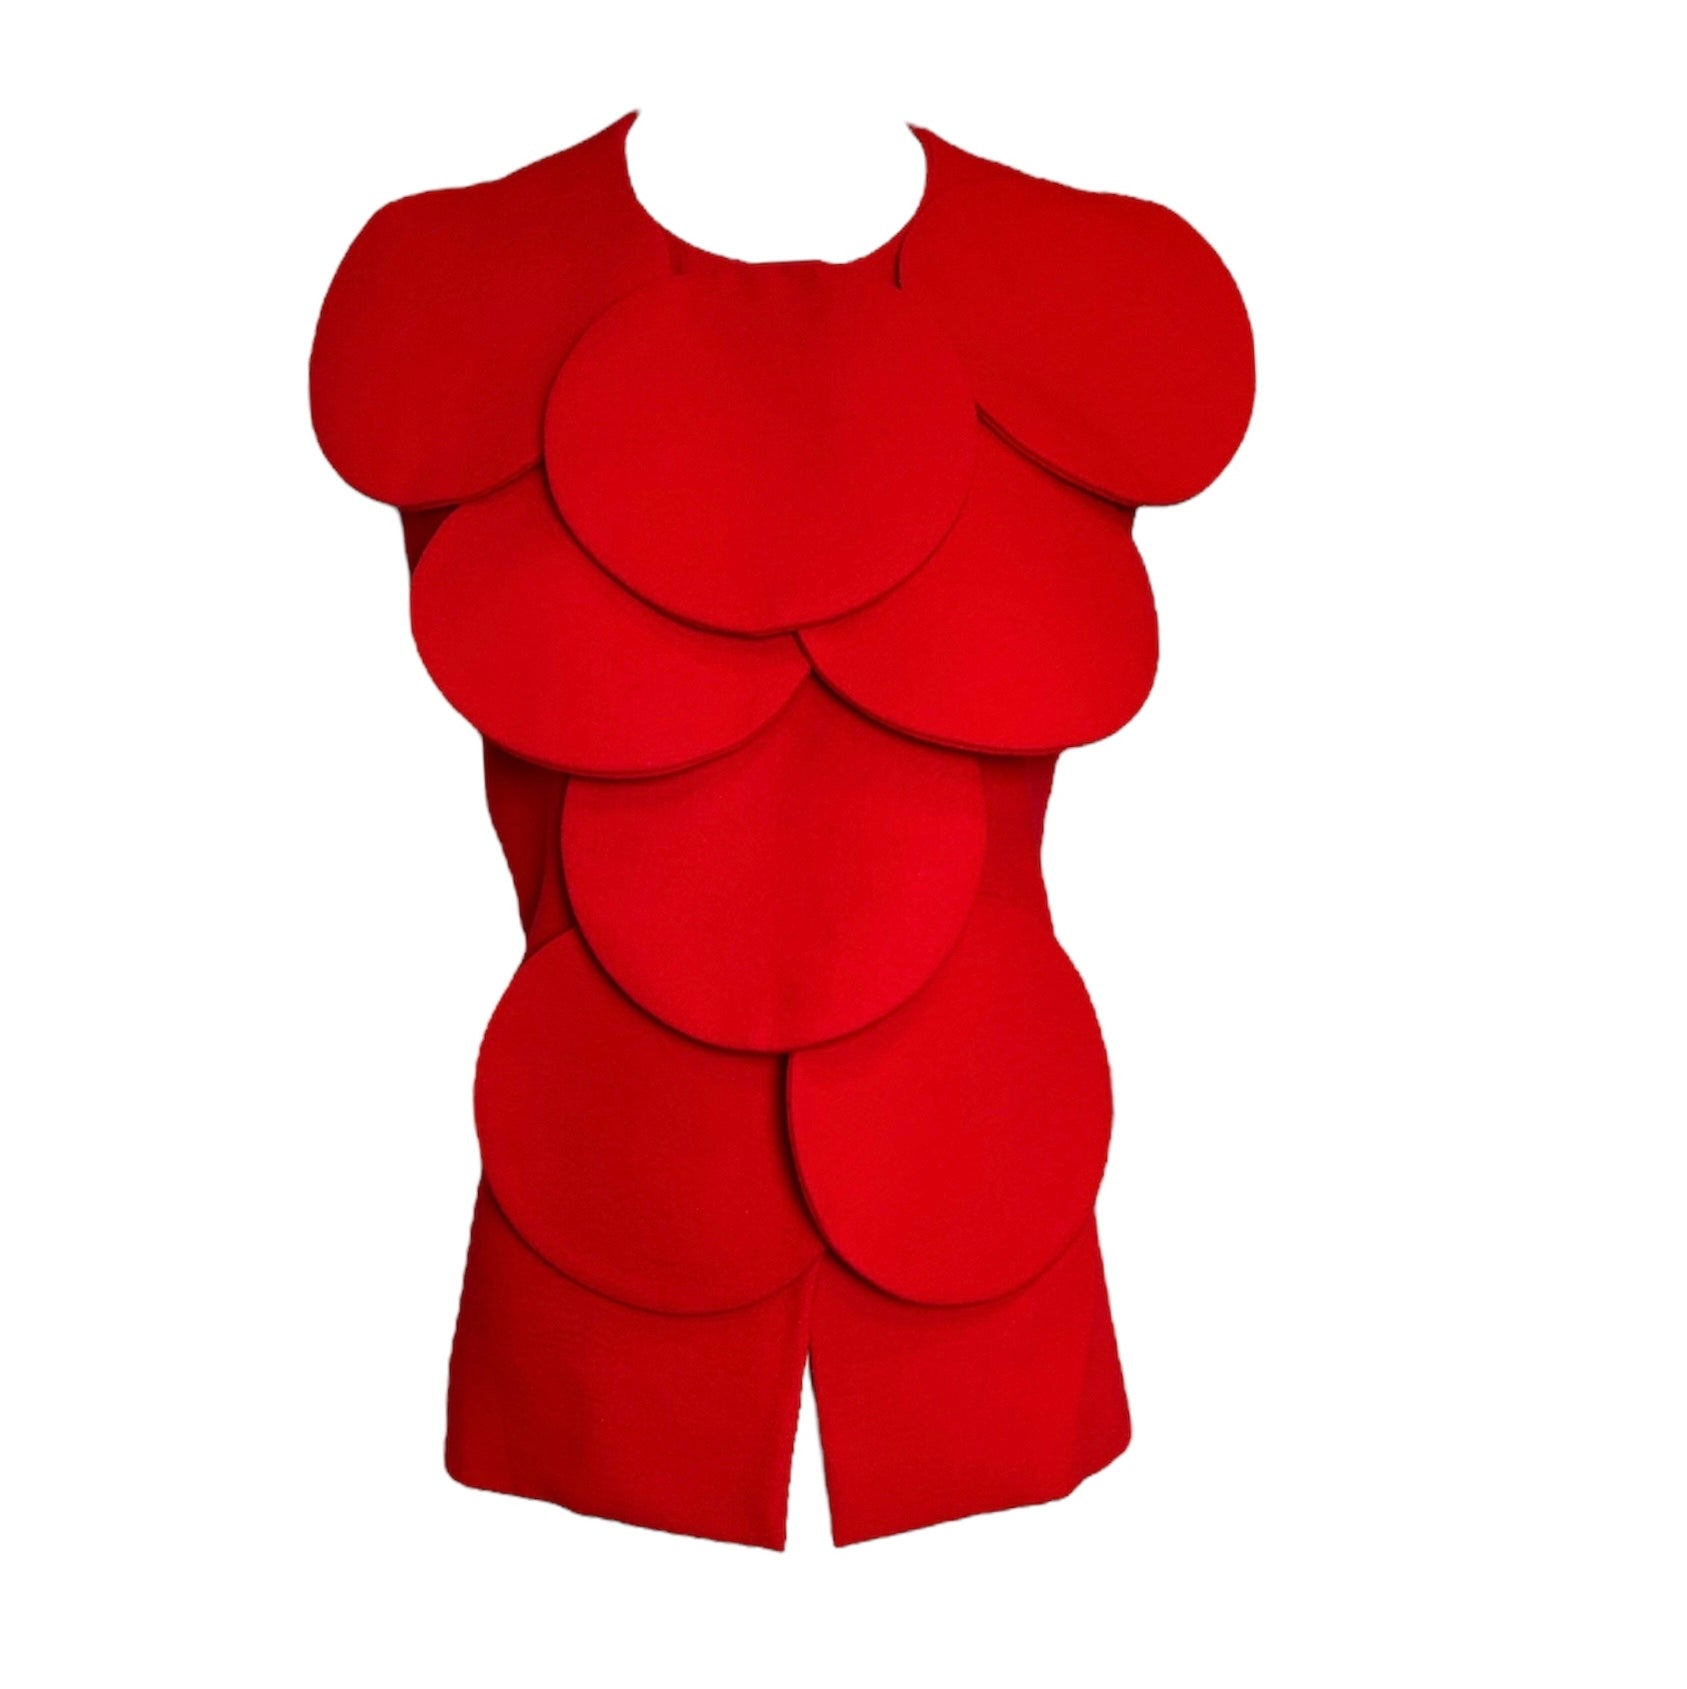 Pierre Cardin Couture Red Bubble Sleeveless Jacket-FRONT PHOTO 1 OF 5